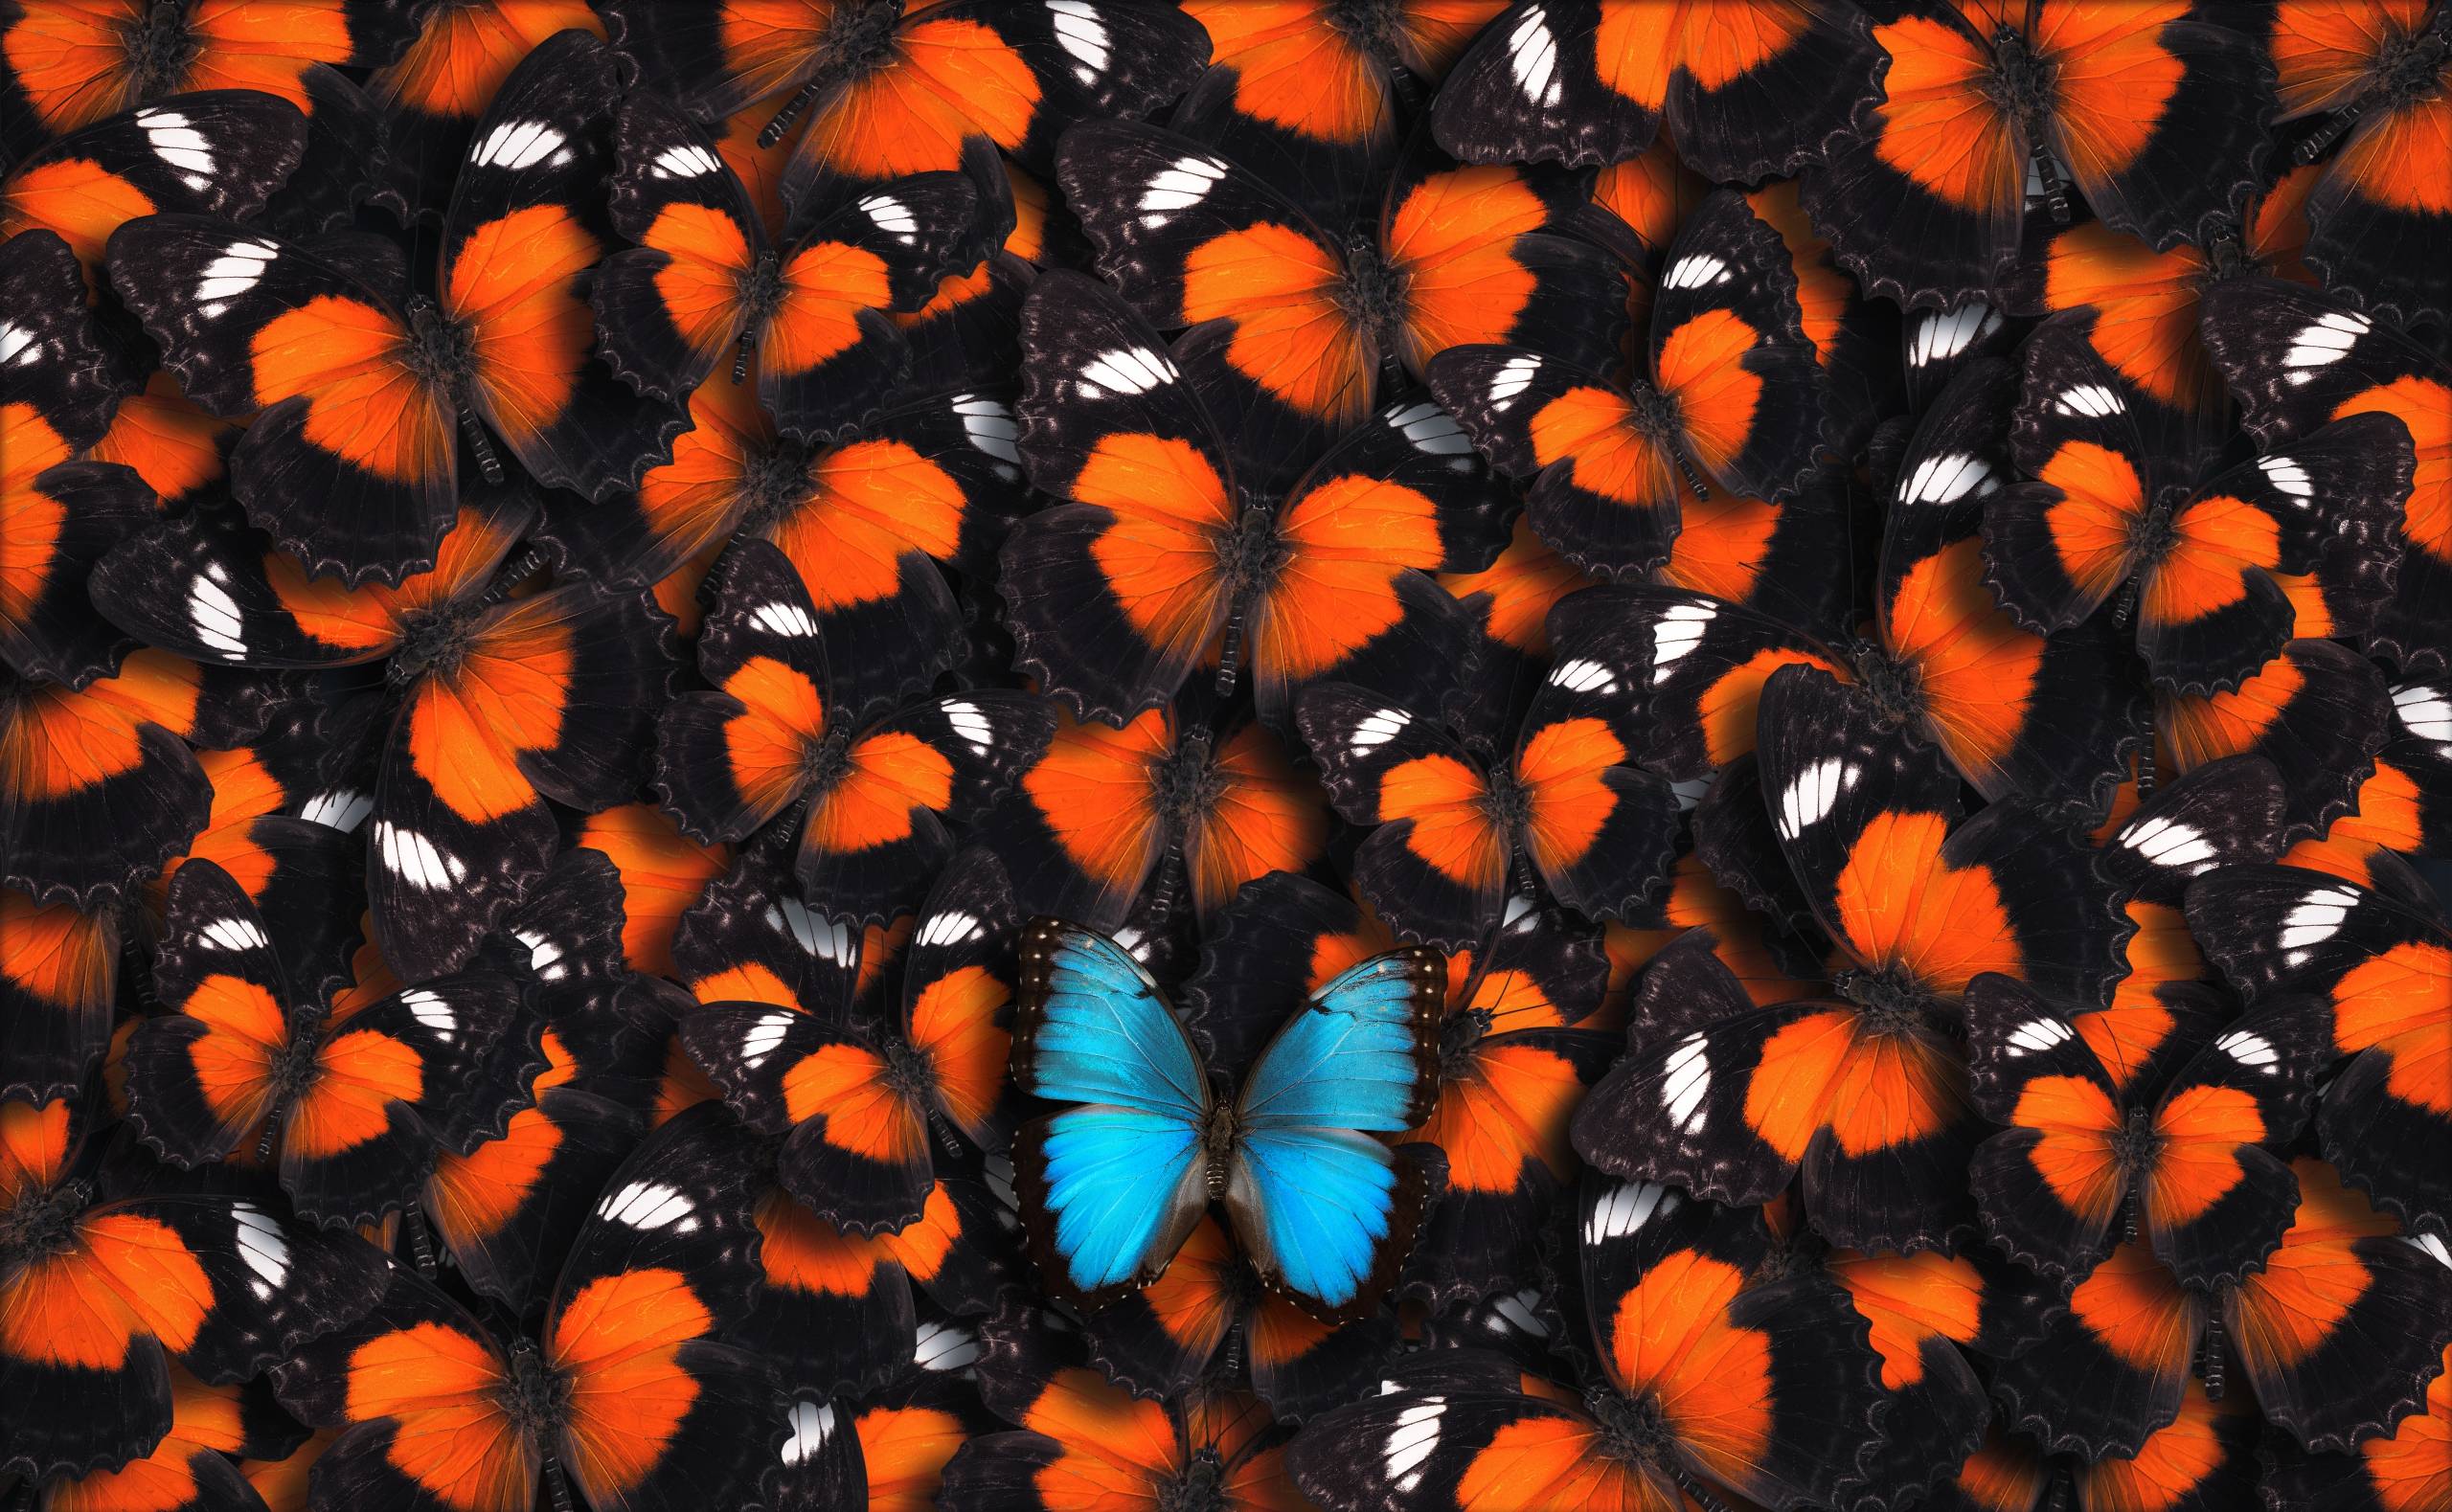 Large group of red lacewing butterflies as a background with one blue morpho butterfly (Morpho peleides) in the foreground.